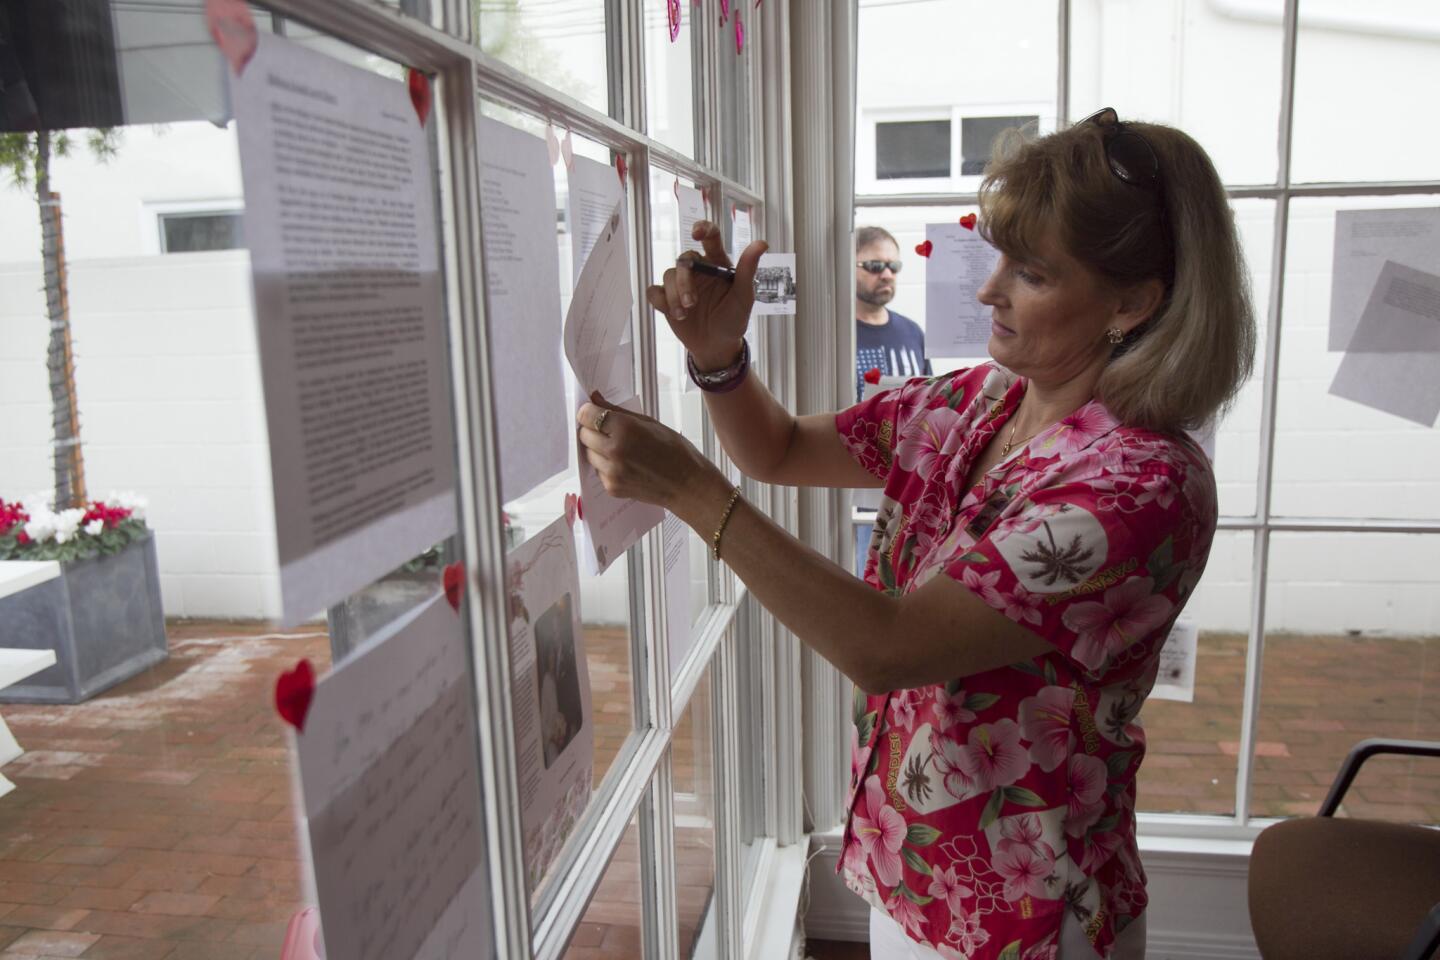 Jackie Smith, a docent at the Balboa Island Museum & Historical Society, hangs a love letter about Balboa Island on the windows at the museum on Saturday, February 15. (Scott Smeltzer, Daily Pilot)